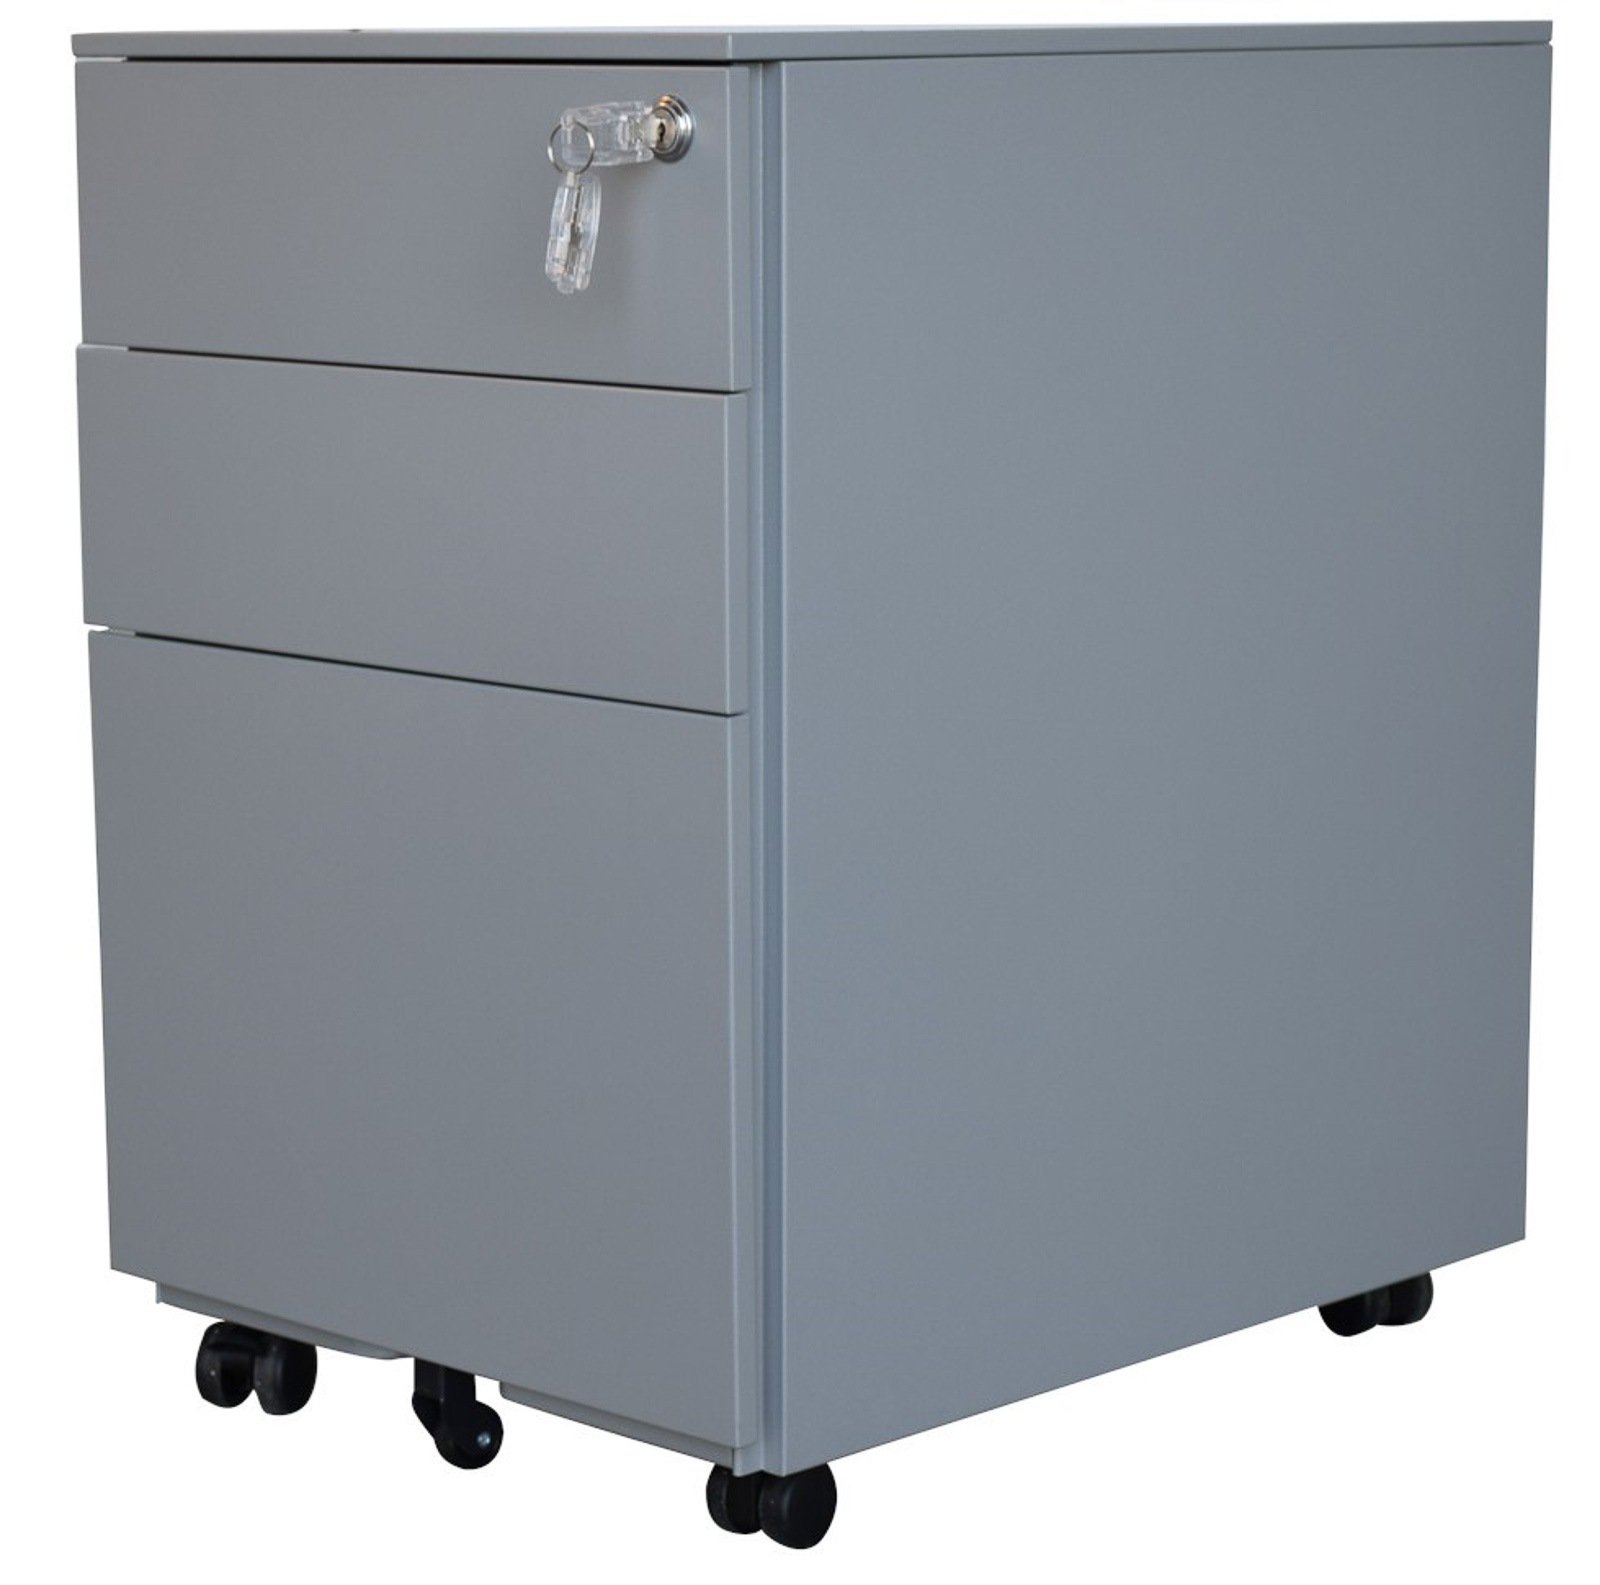 Jet-Line Office Roller-Container, gray